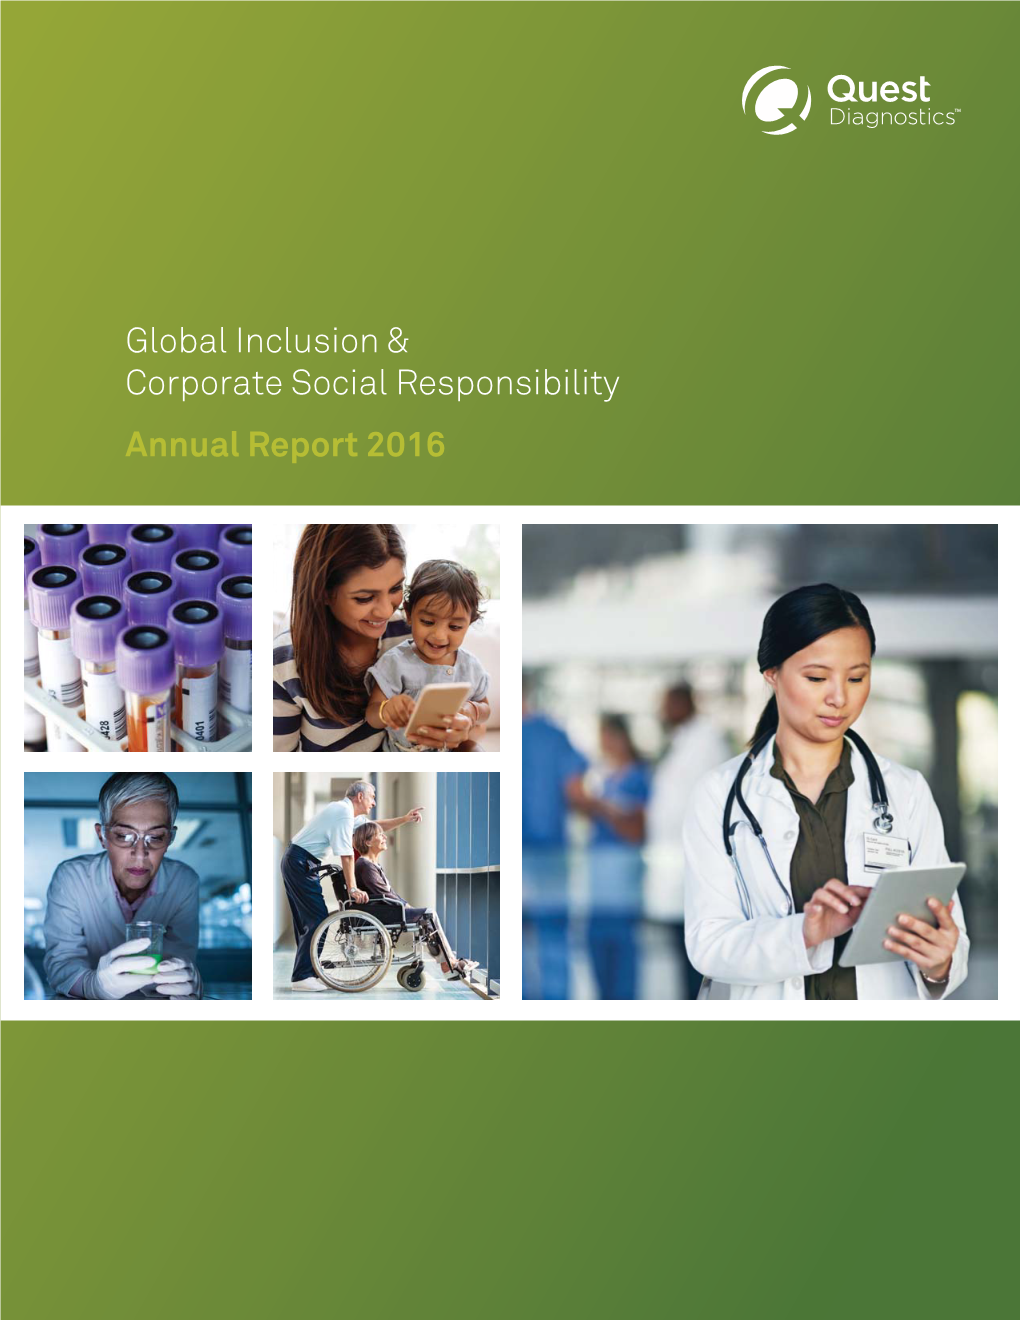 Global Inclusion & Corporate Social Responsibility Annual Report 2016